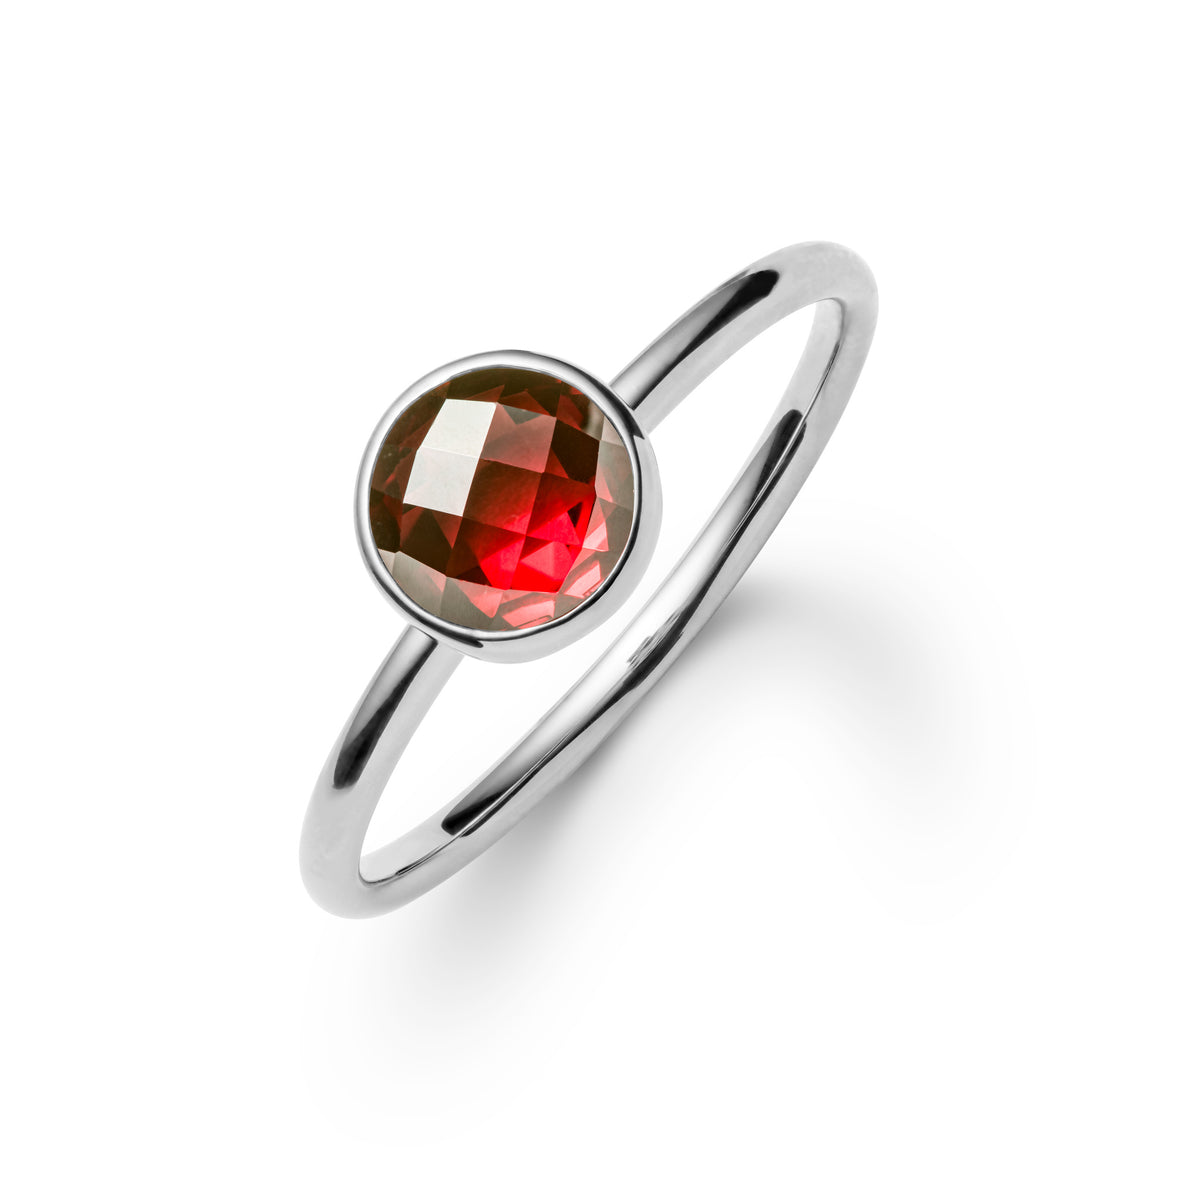 Amazon.com: Garnet Gemstone Ring,925 Sterling Silver,Red Garnet Ring,Poison  Box Ring,Elegant Design Ring,Vintage Style Gift,January Birthstone Ring,Faceted  Stone Ring,Healing Crystal,Handcrafted Jewelry (9.25) : Handmade Products